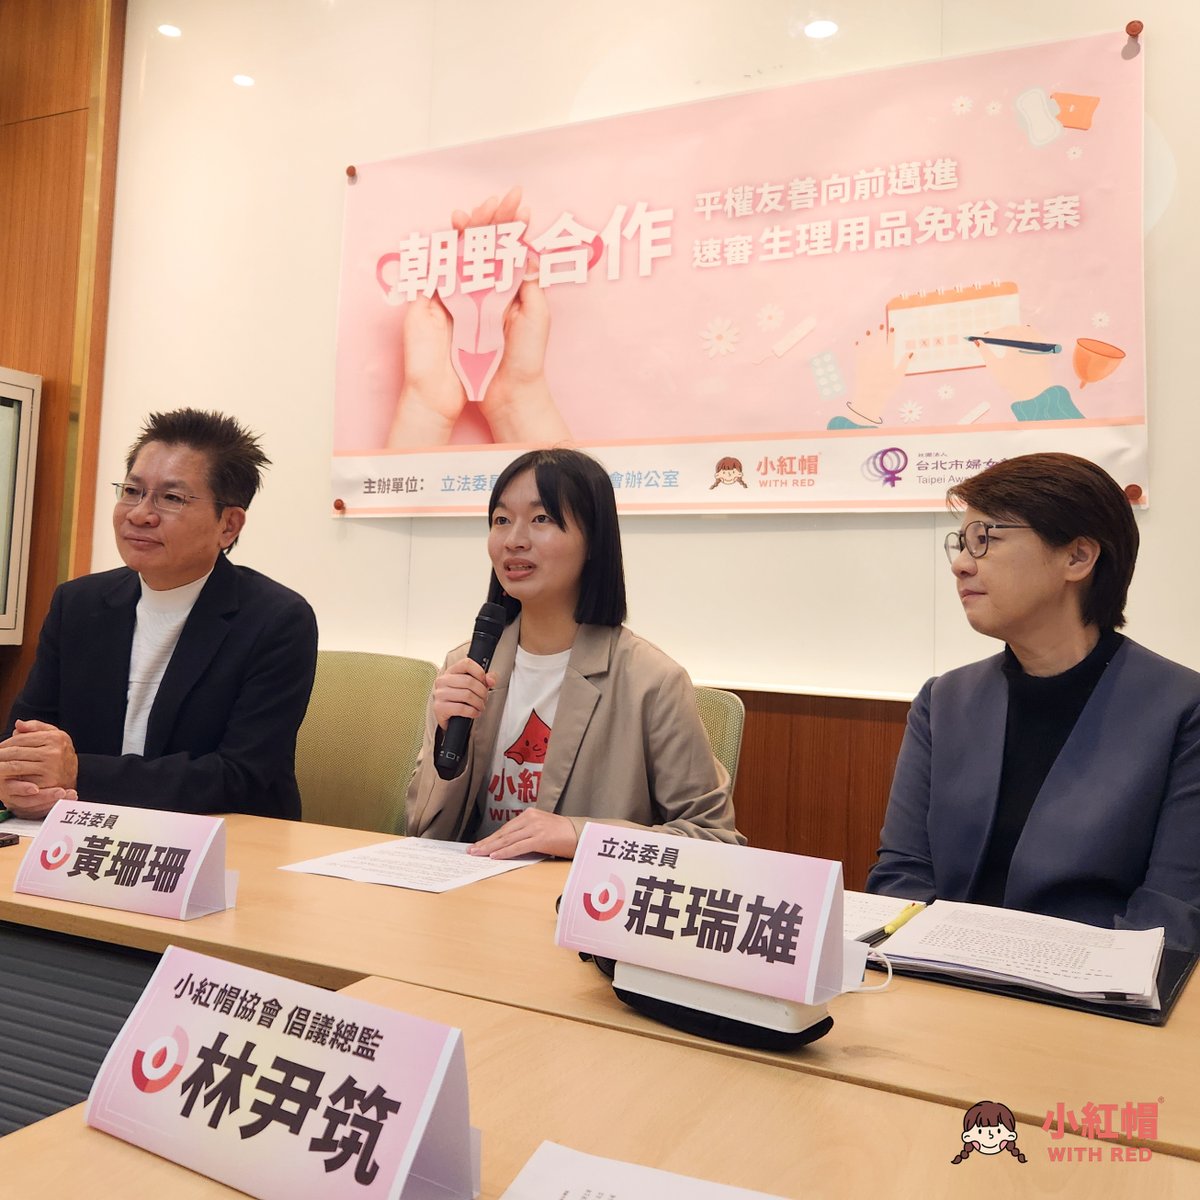 Taiwan might soon ABOLISH TAMPON TAX🩸 After years of campaigning, this Wednesday we @periodequity_tw collaborated with legislators from 3 major parties, achieving a cross-party consensus on abolishing the tampon tax and prioritising period equity on the agenda!